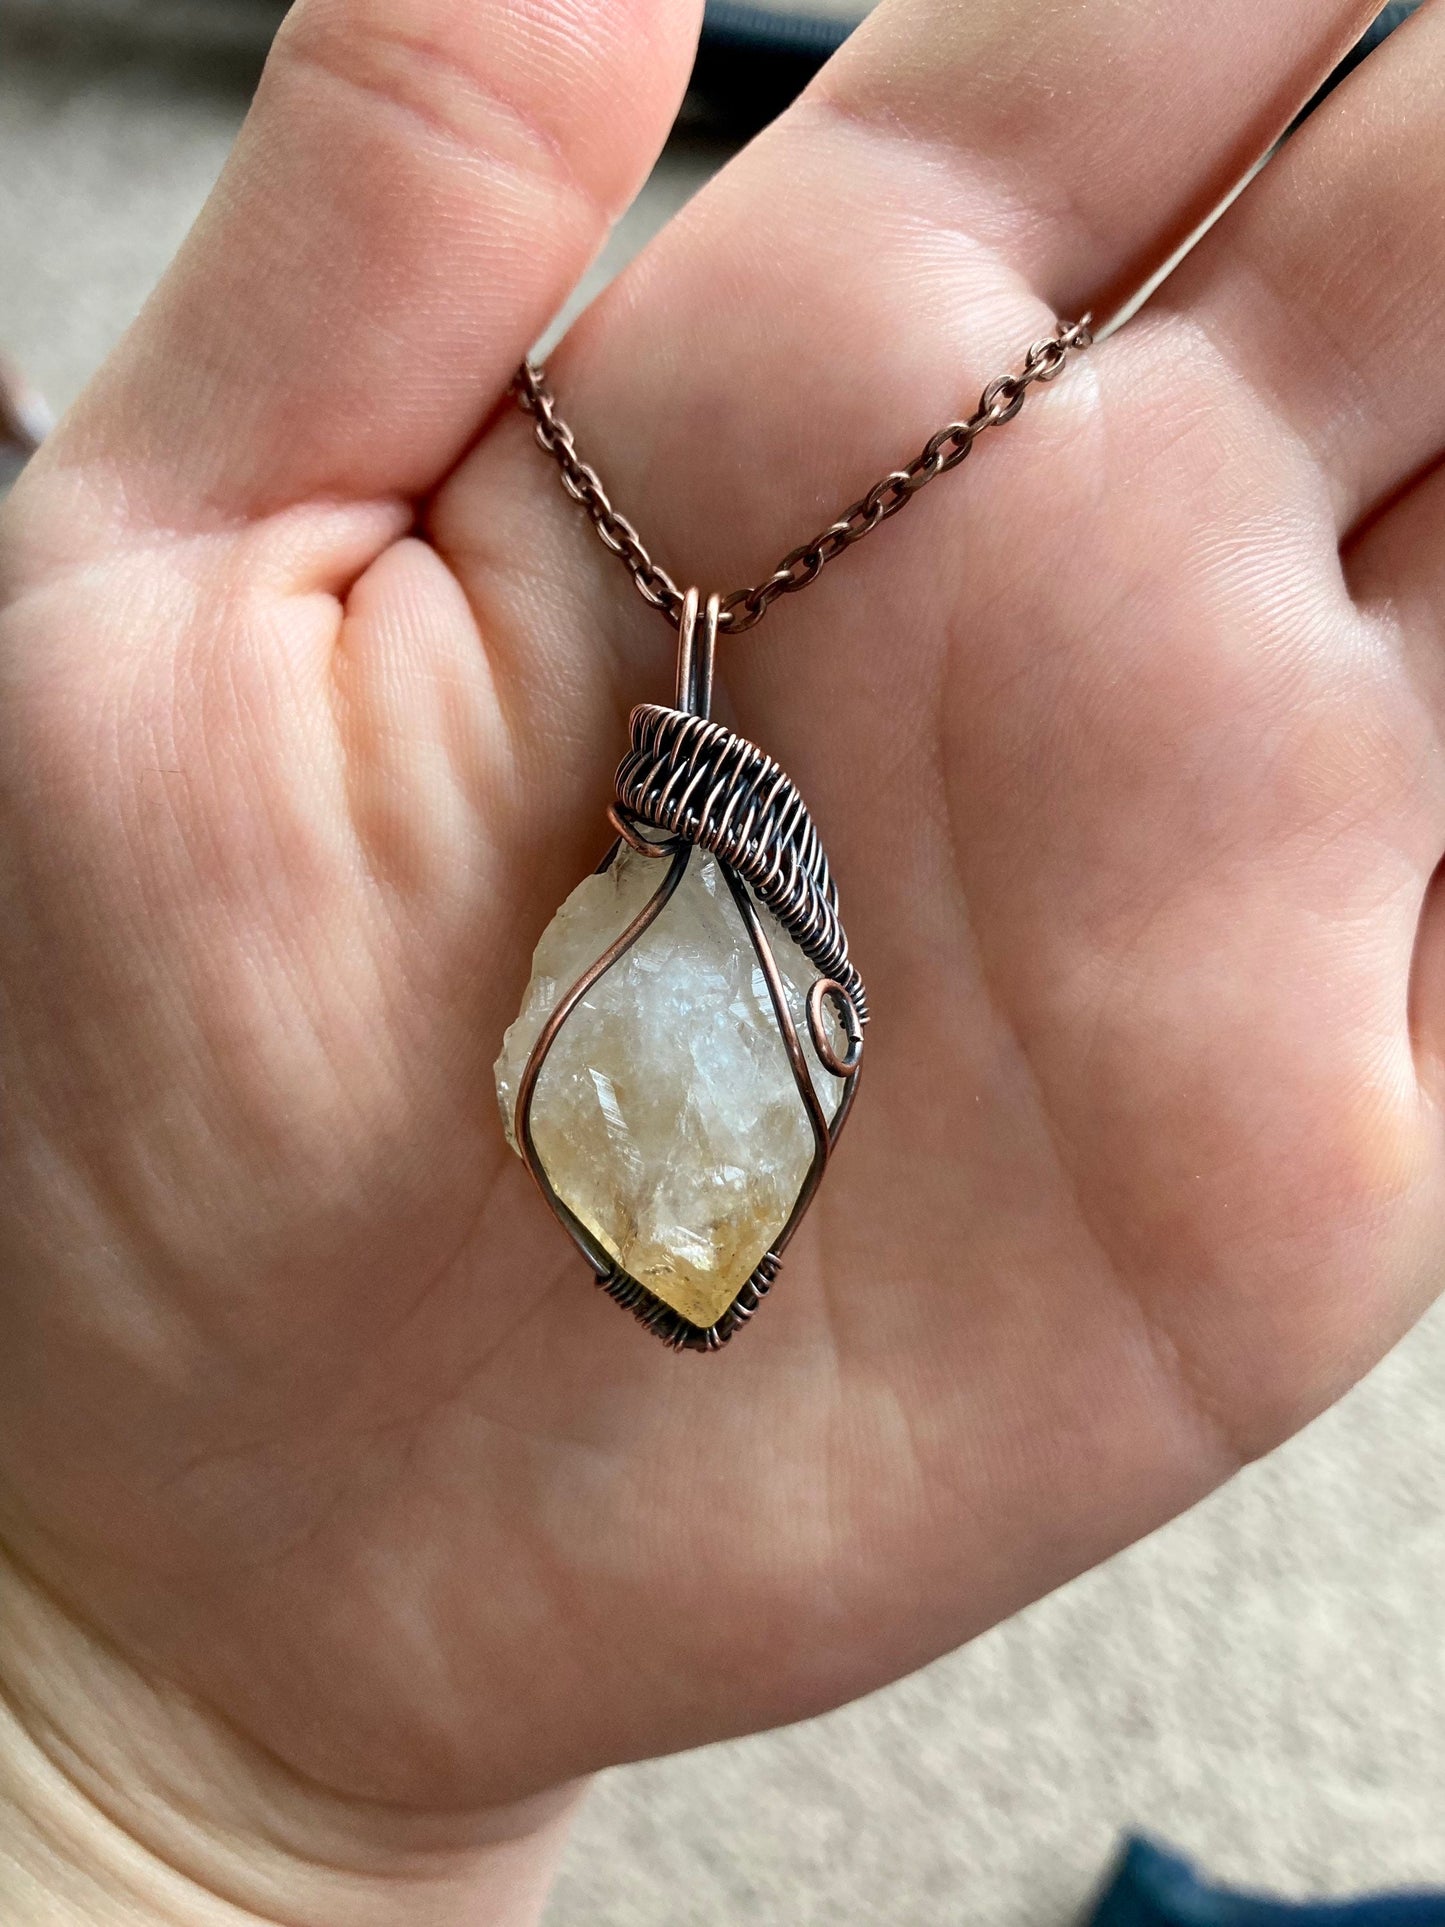 Citrine pendant handmade necklace wire wrapped natural stone with 18 inch length chain